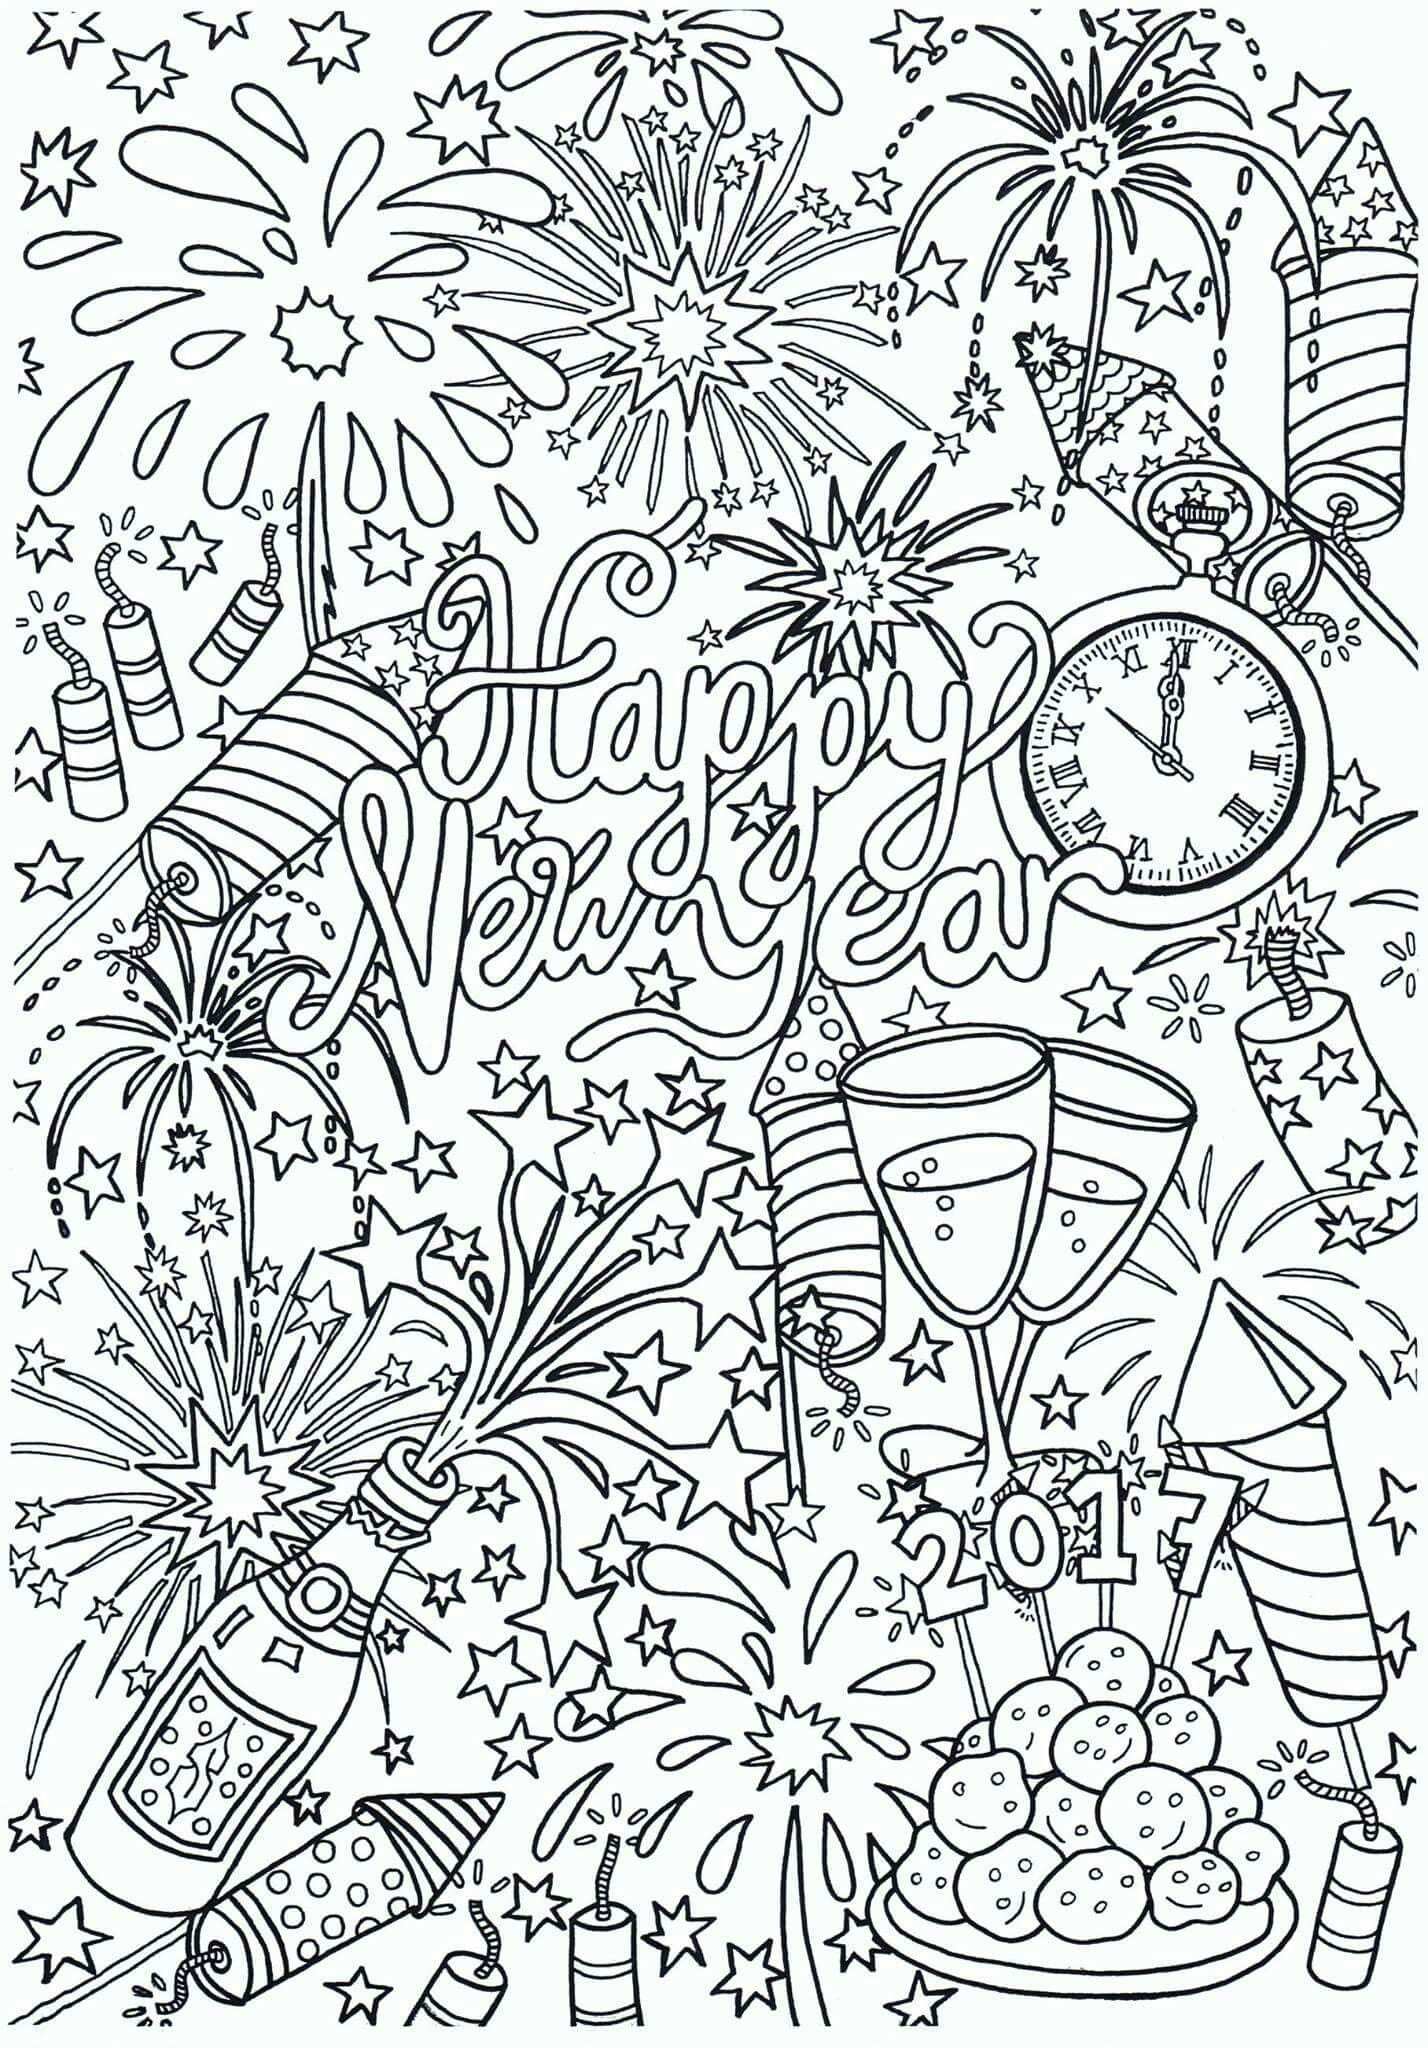 Happy New Year New Year Coloring Pages New Year S Eve Colors New Year Doodle